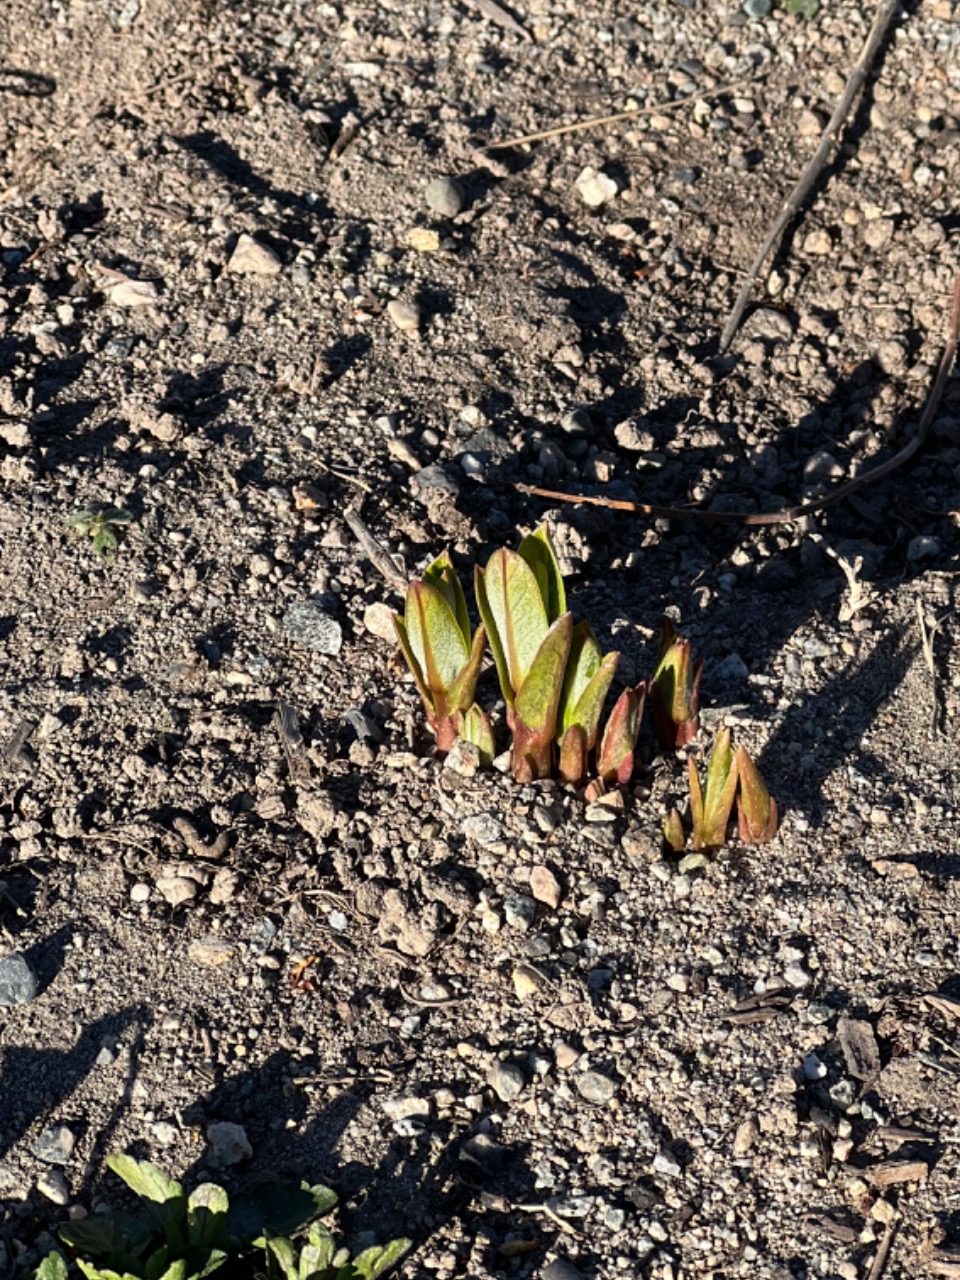 Showy milkweed just begins to pop through the ground. Photo from above